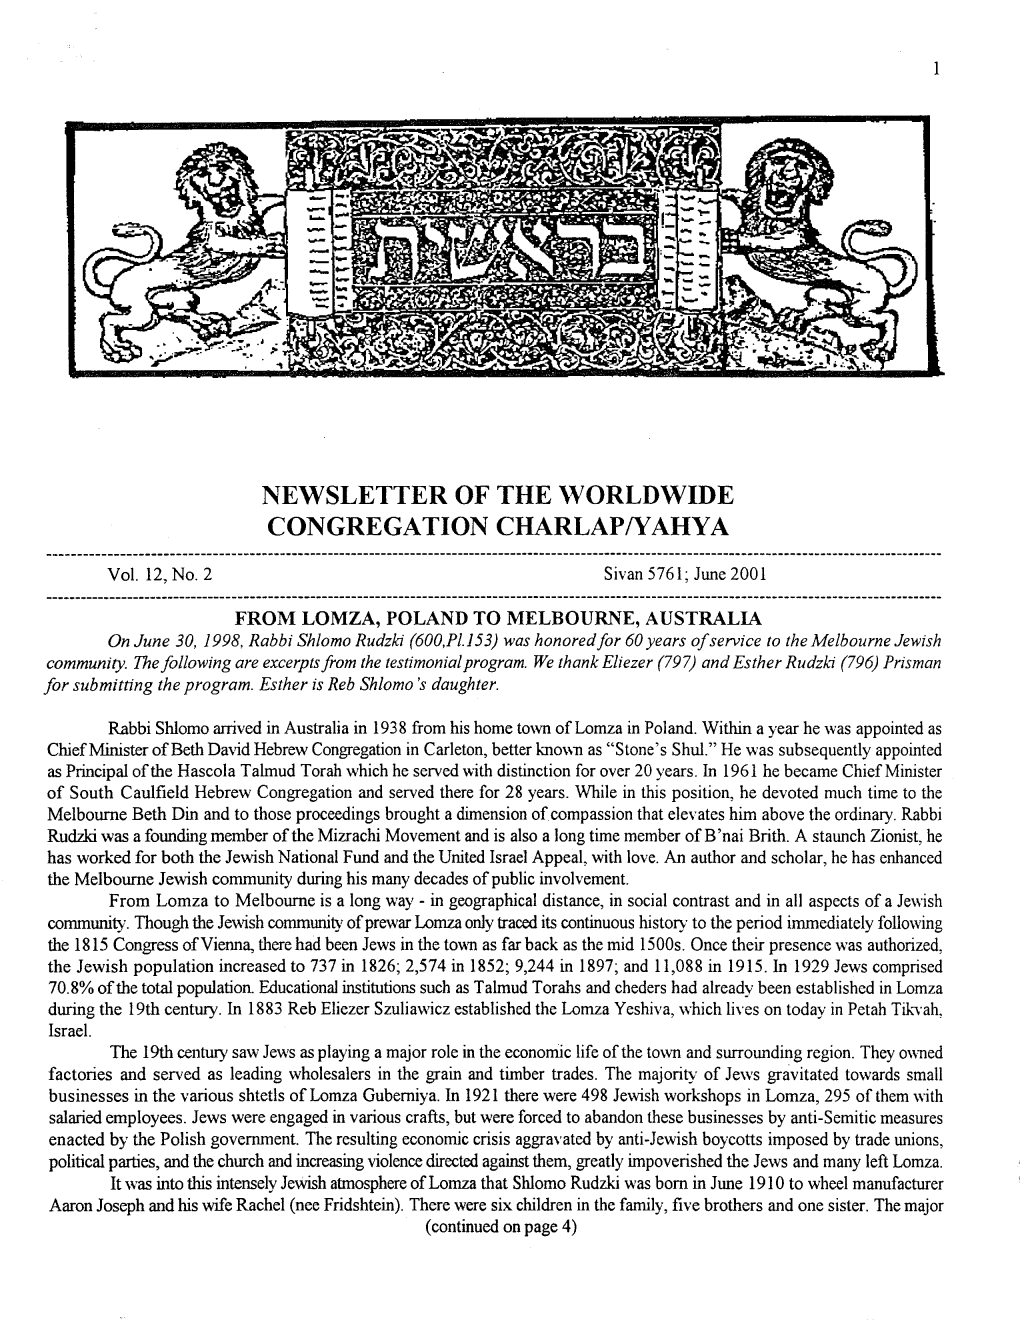 Newsletter of the \Vorldwide Congregation Charlap/Yahya